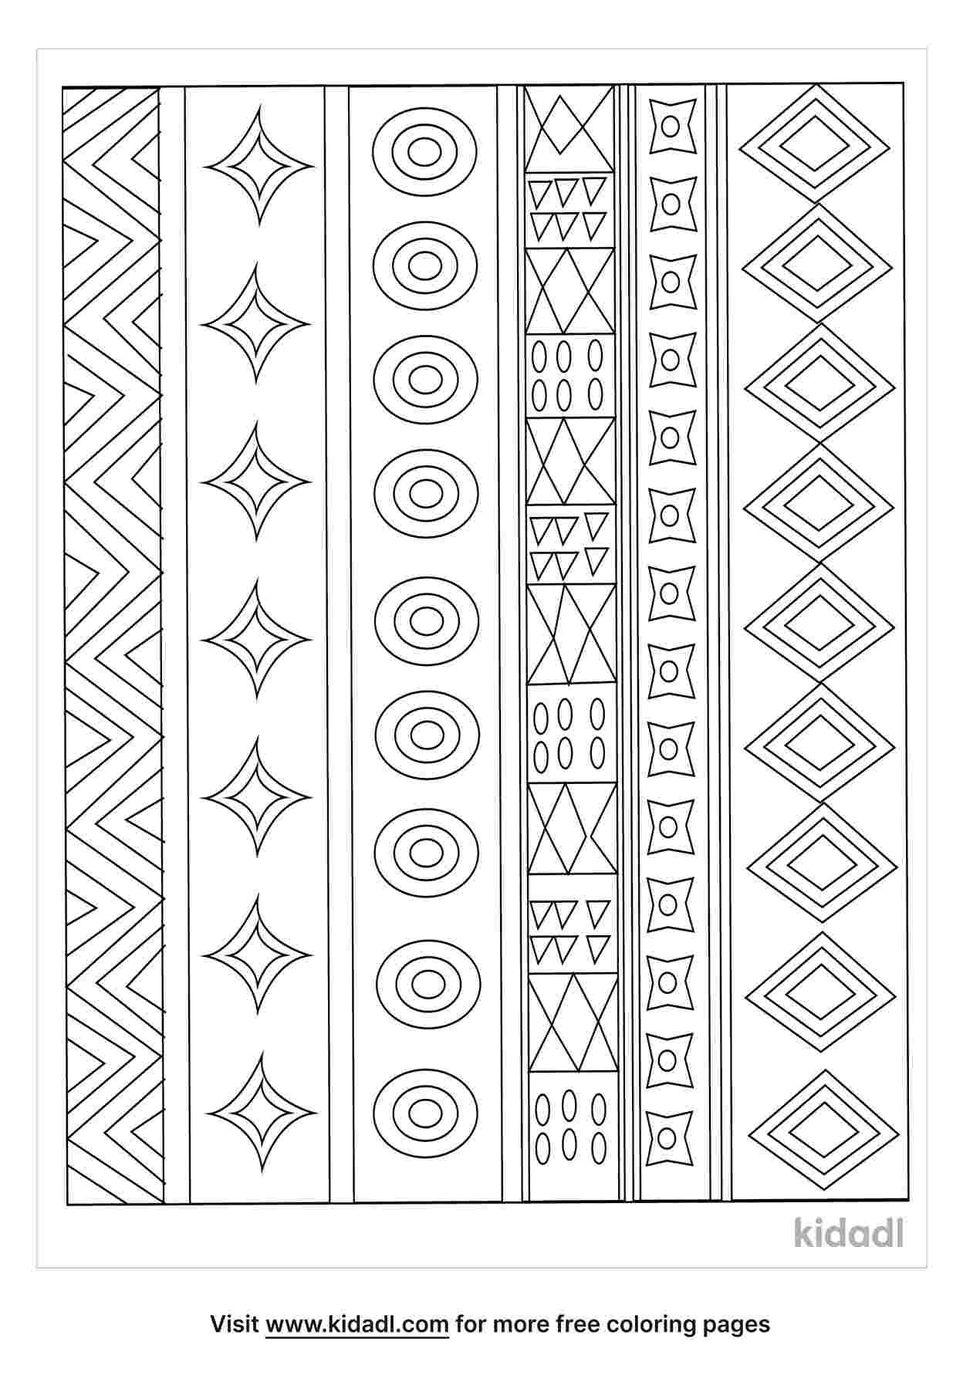 Beautiful fabric artwork coloring page.